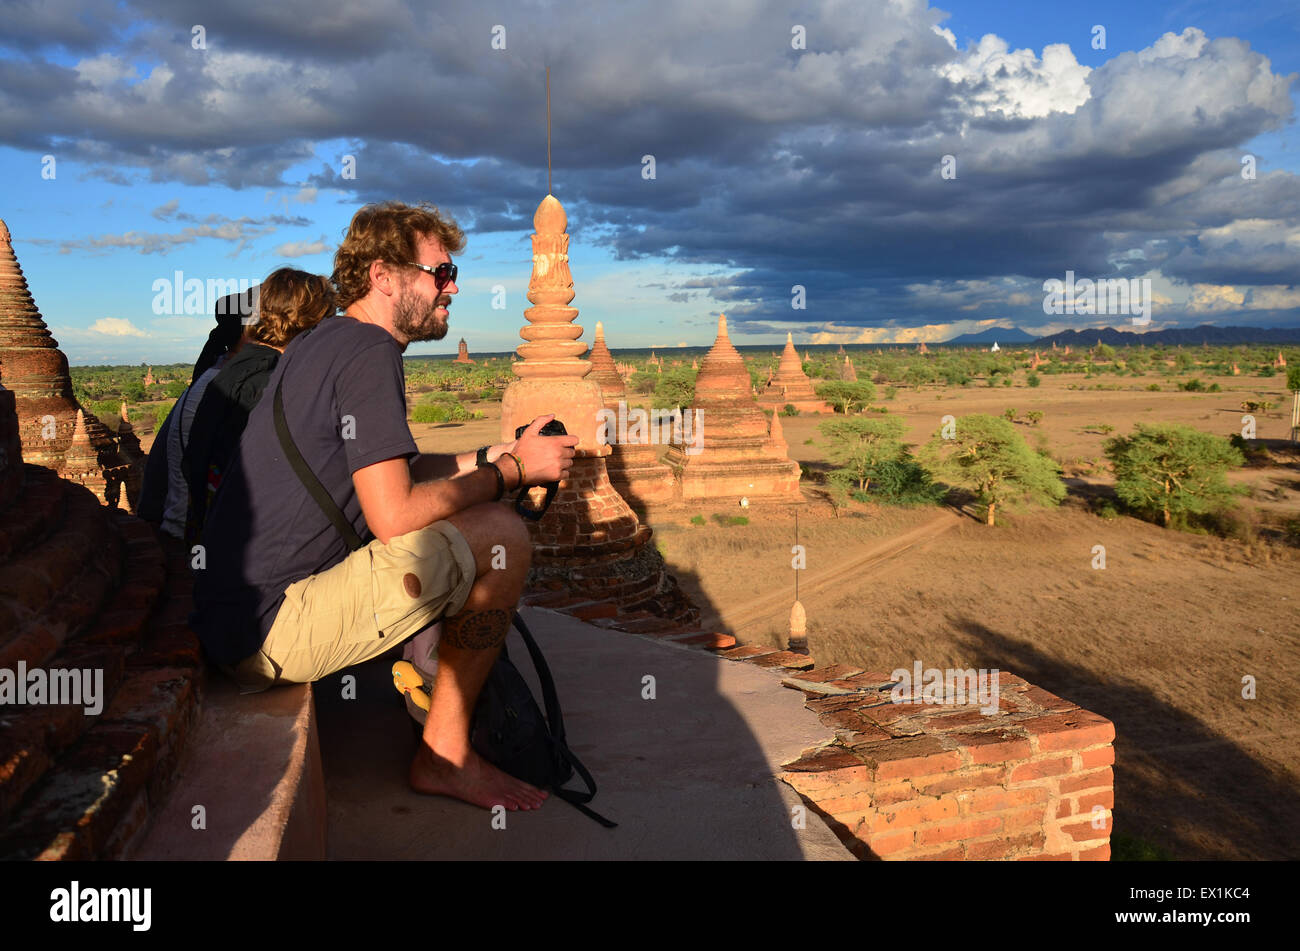 The main tourist destination in Myanmar. The area known as Bagan or bureaucratically as the ‘Bagan Archaeological Zone’ with ove Stock Photo